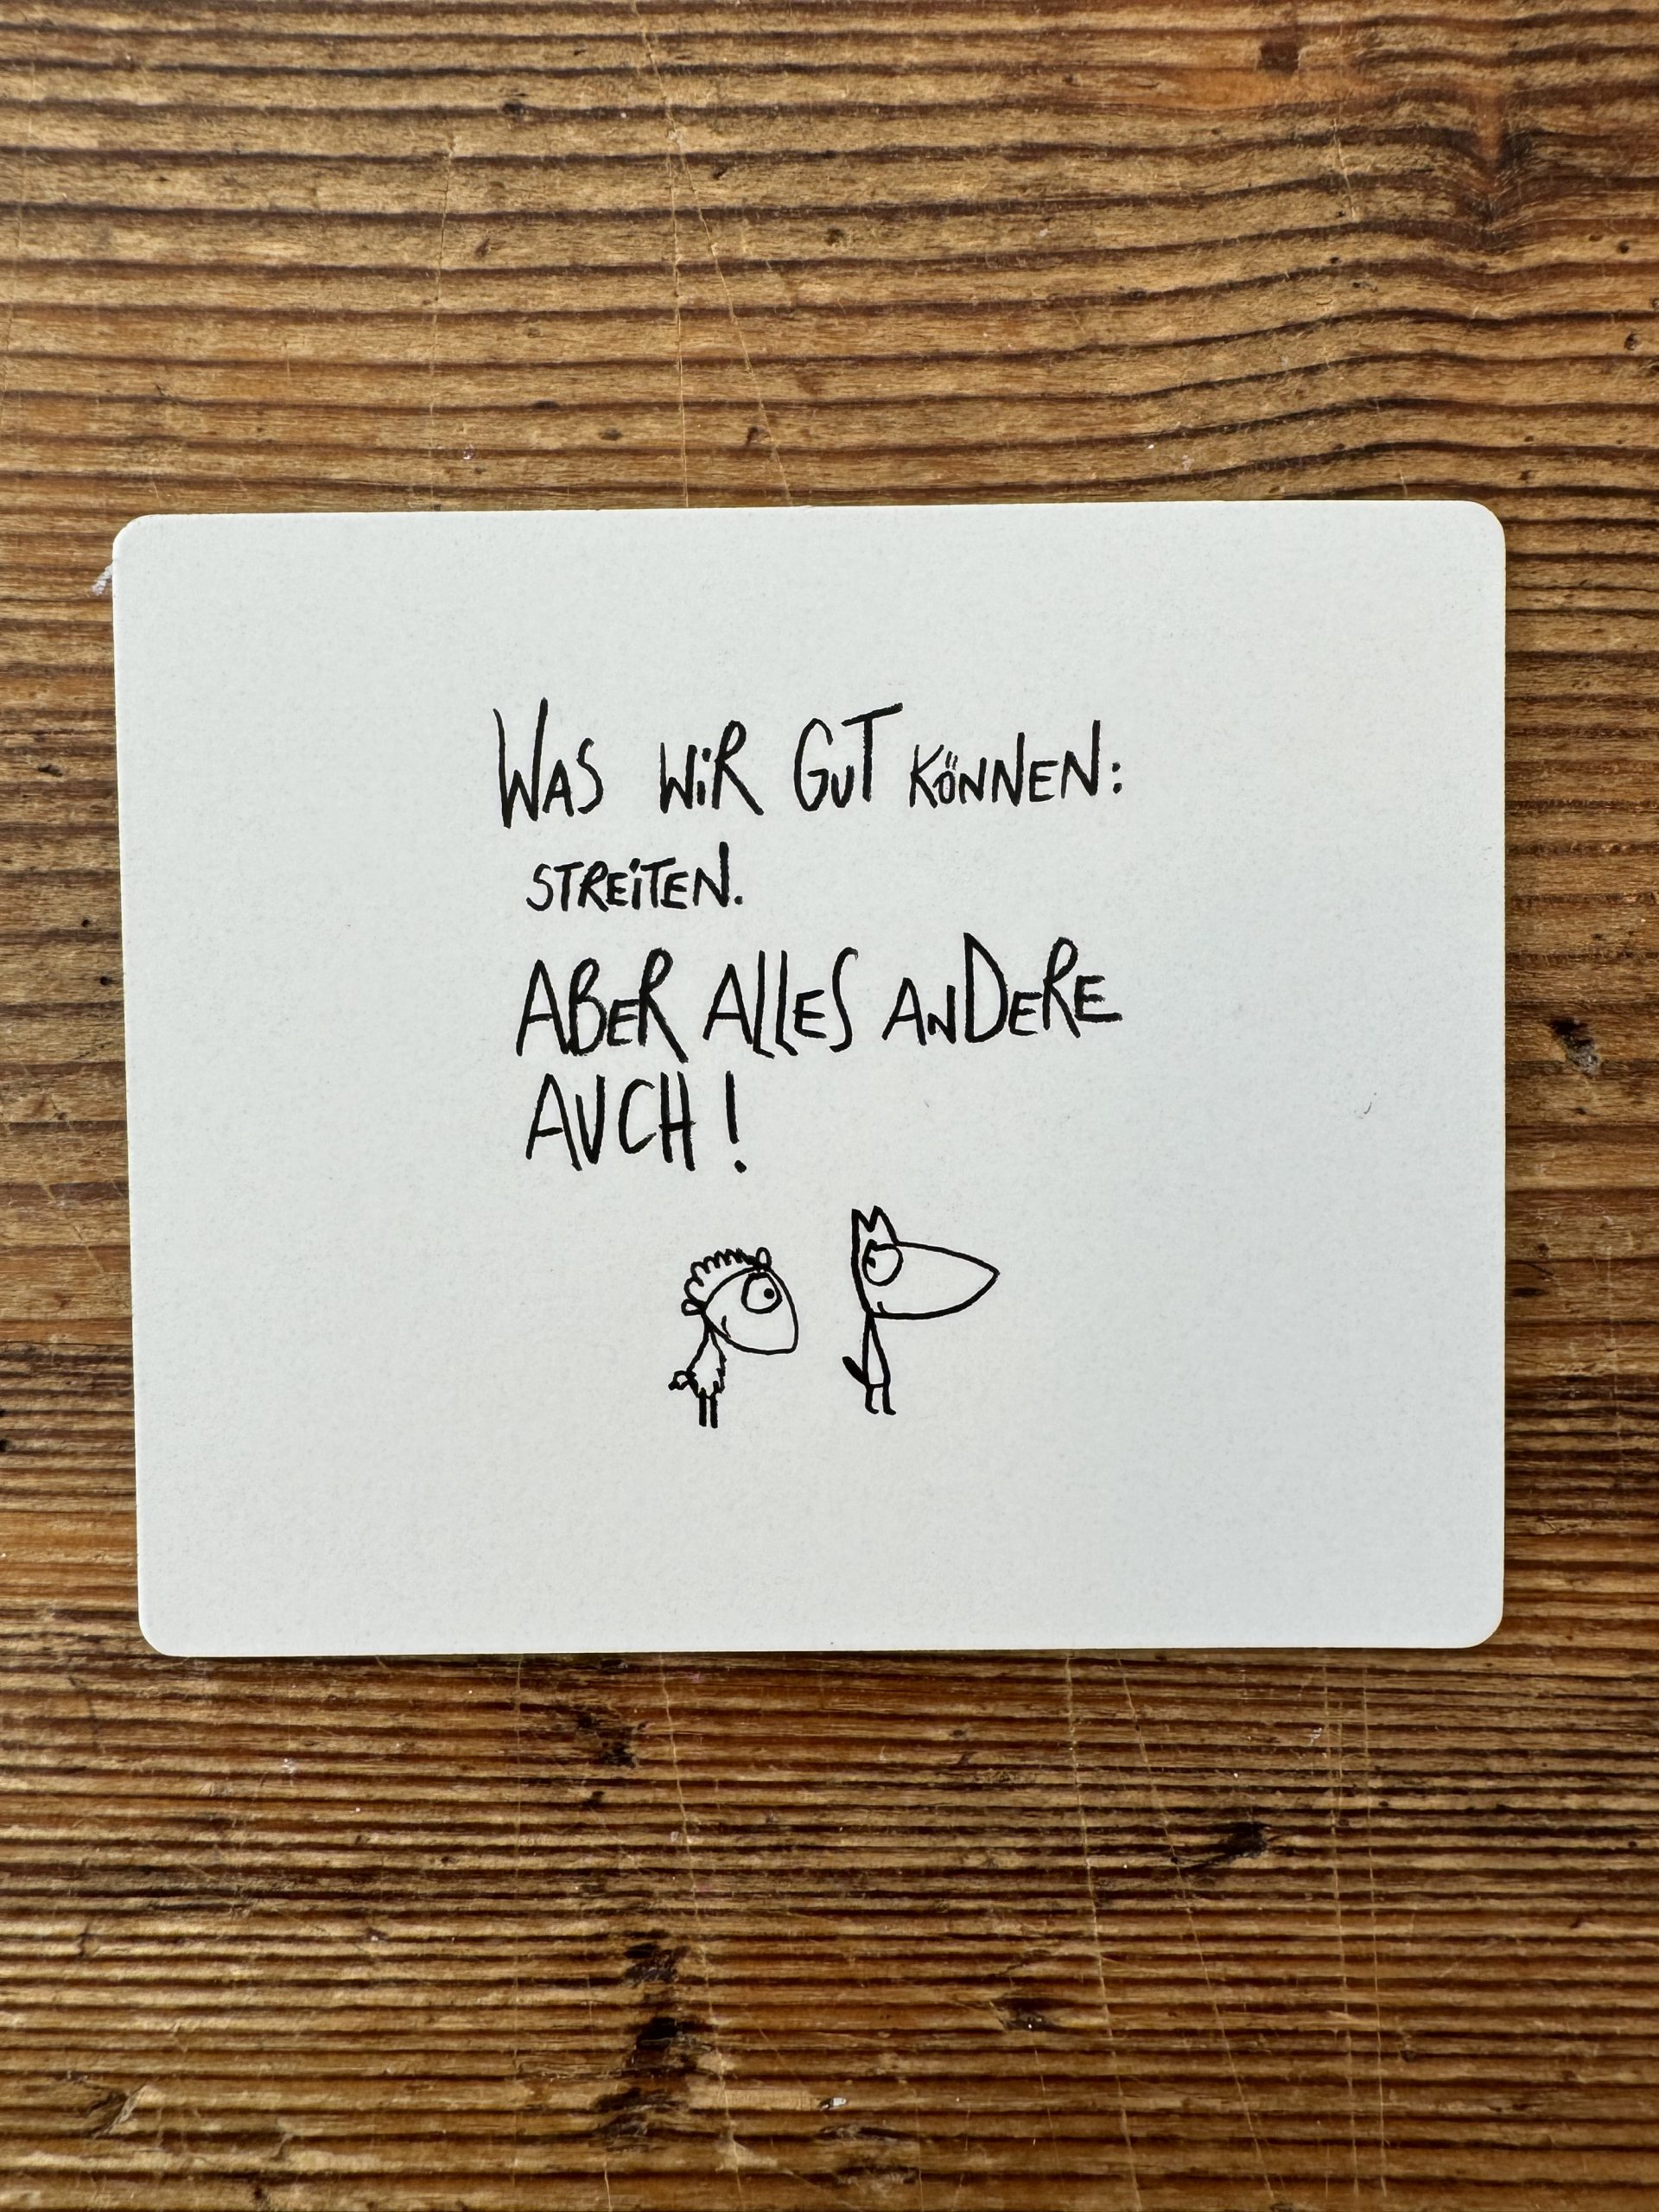 eDITION GUTE GEISTER – Magnet - "Alles andere auch"